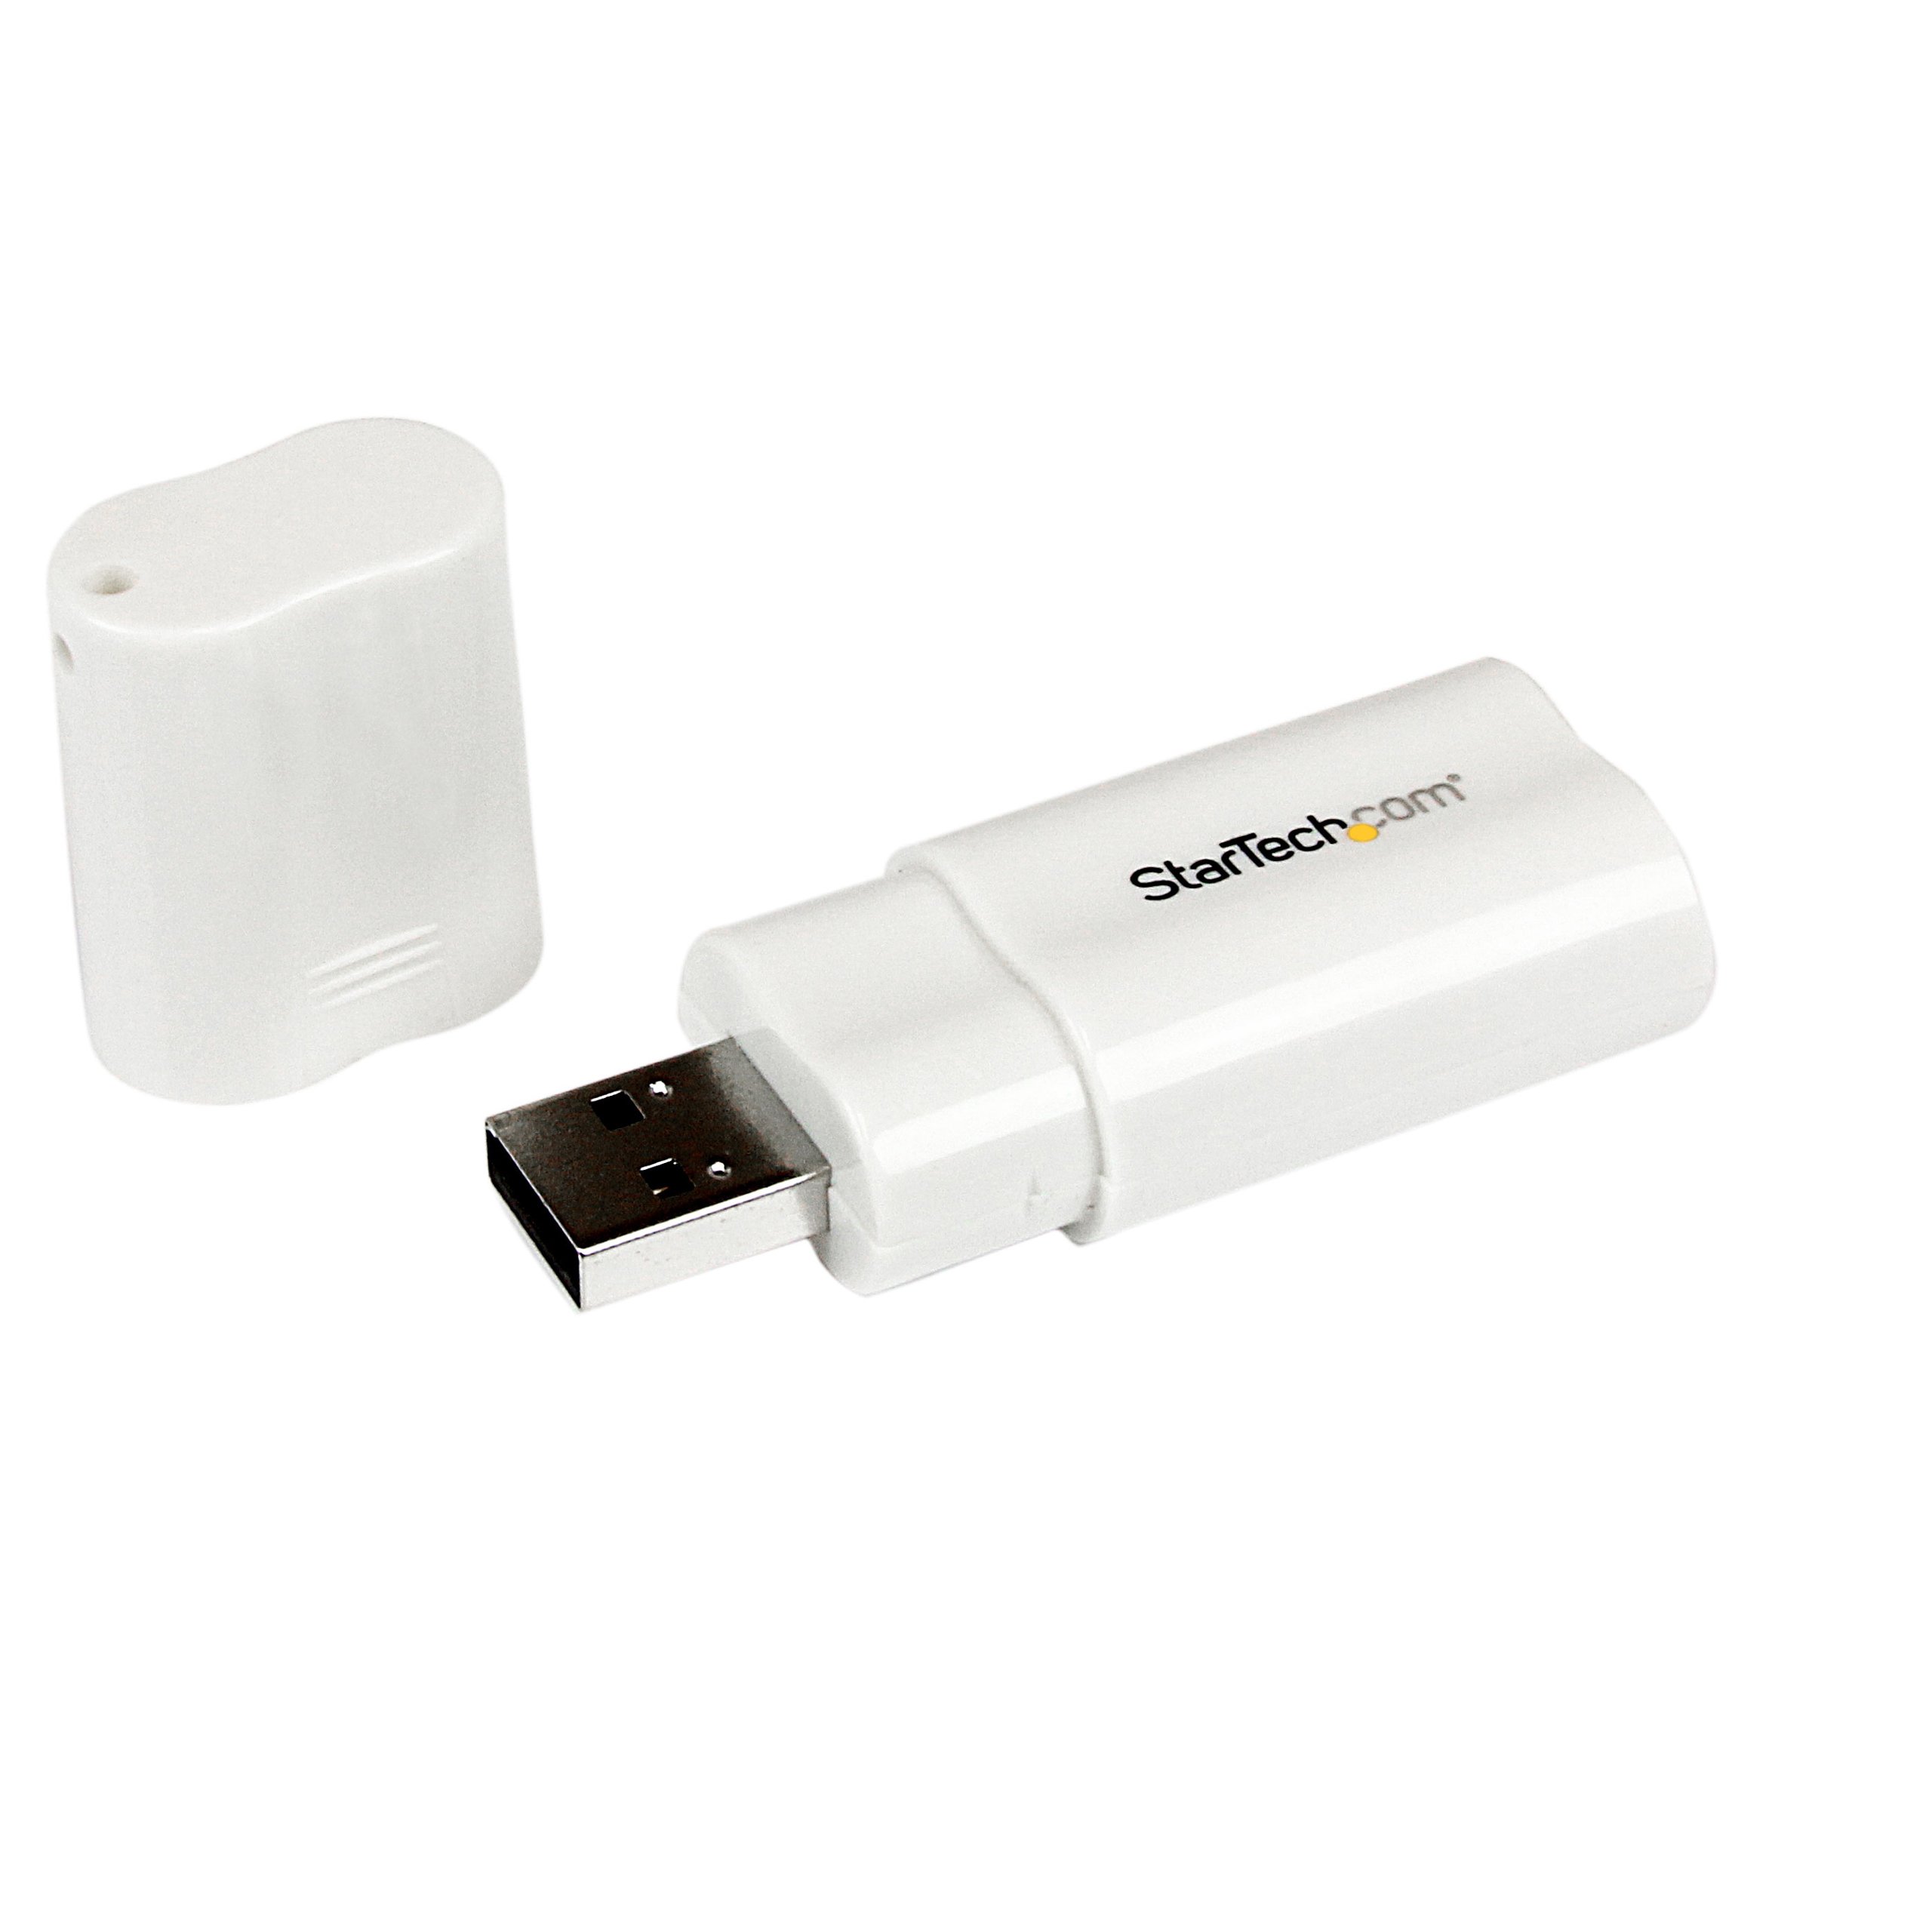 StarTech.com USB to Stereo Audio Adapter Converter ICUSBAUDIO, White, One Size